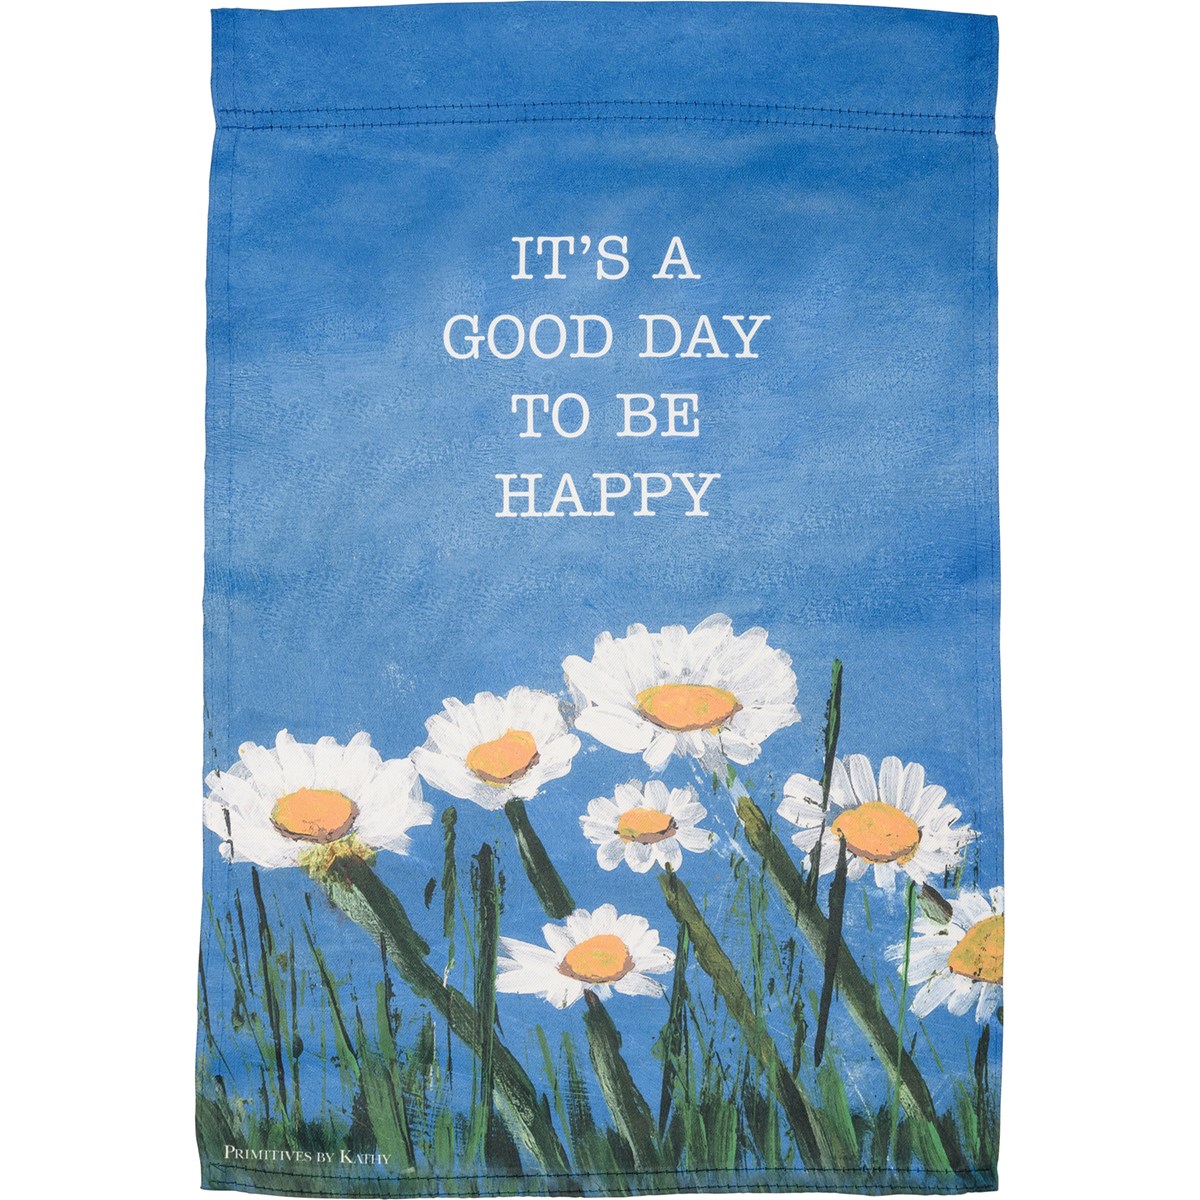 It's A Good Day To Be Happy Garden Flag - Polyester